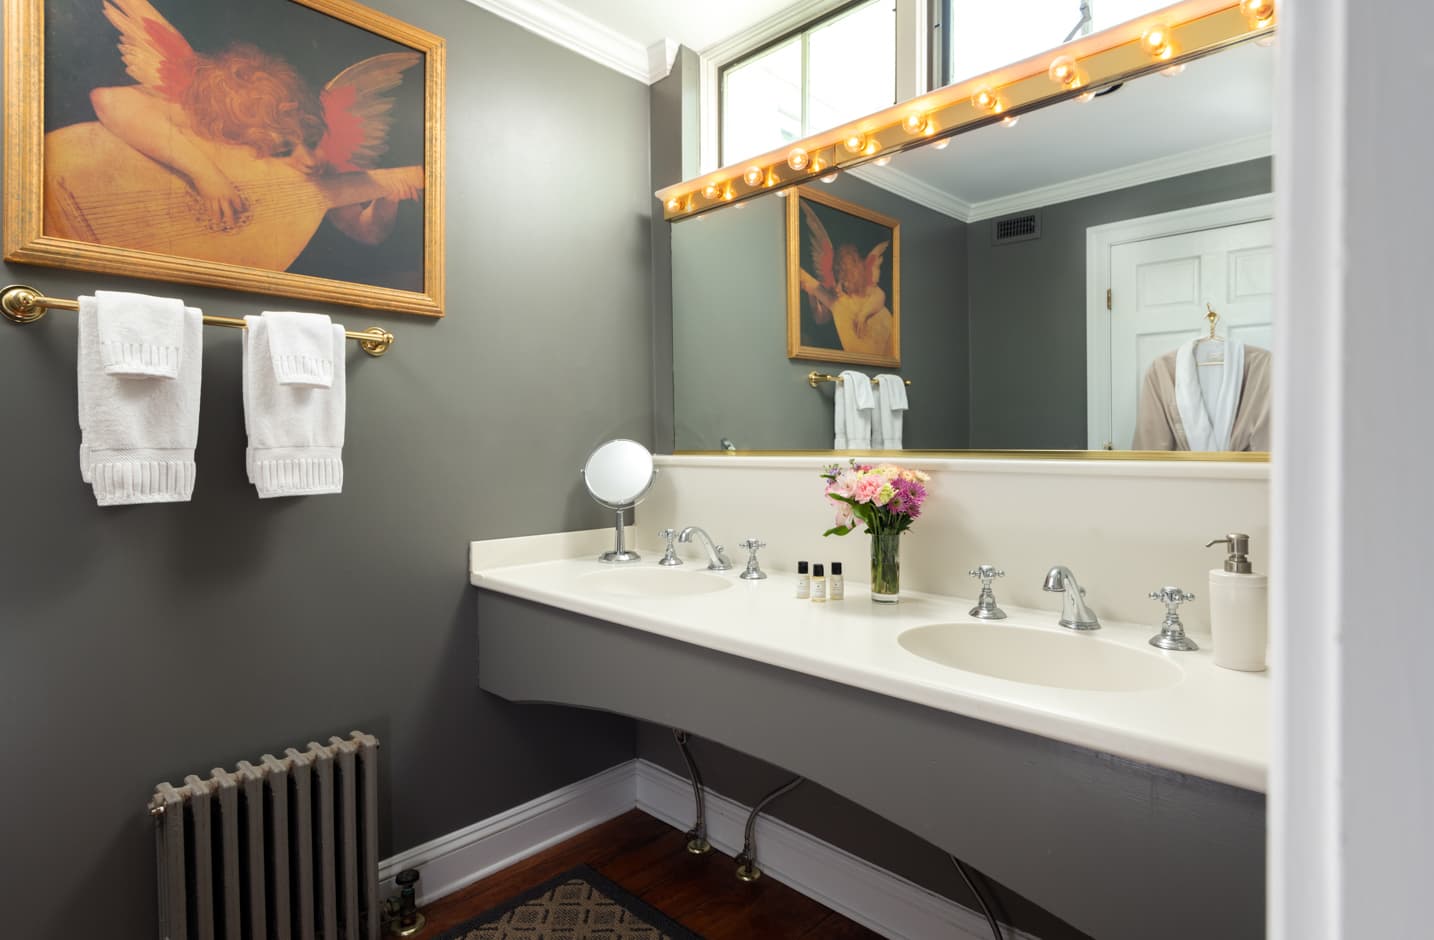 Bathroom with a double vanity sink a large mirror and art on the wall